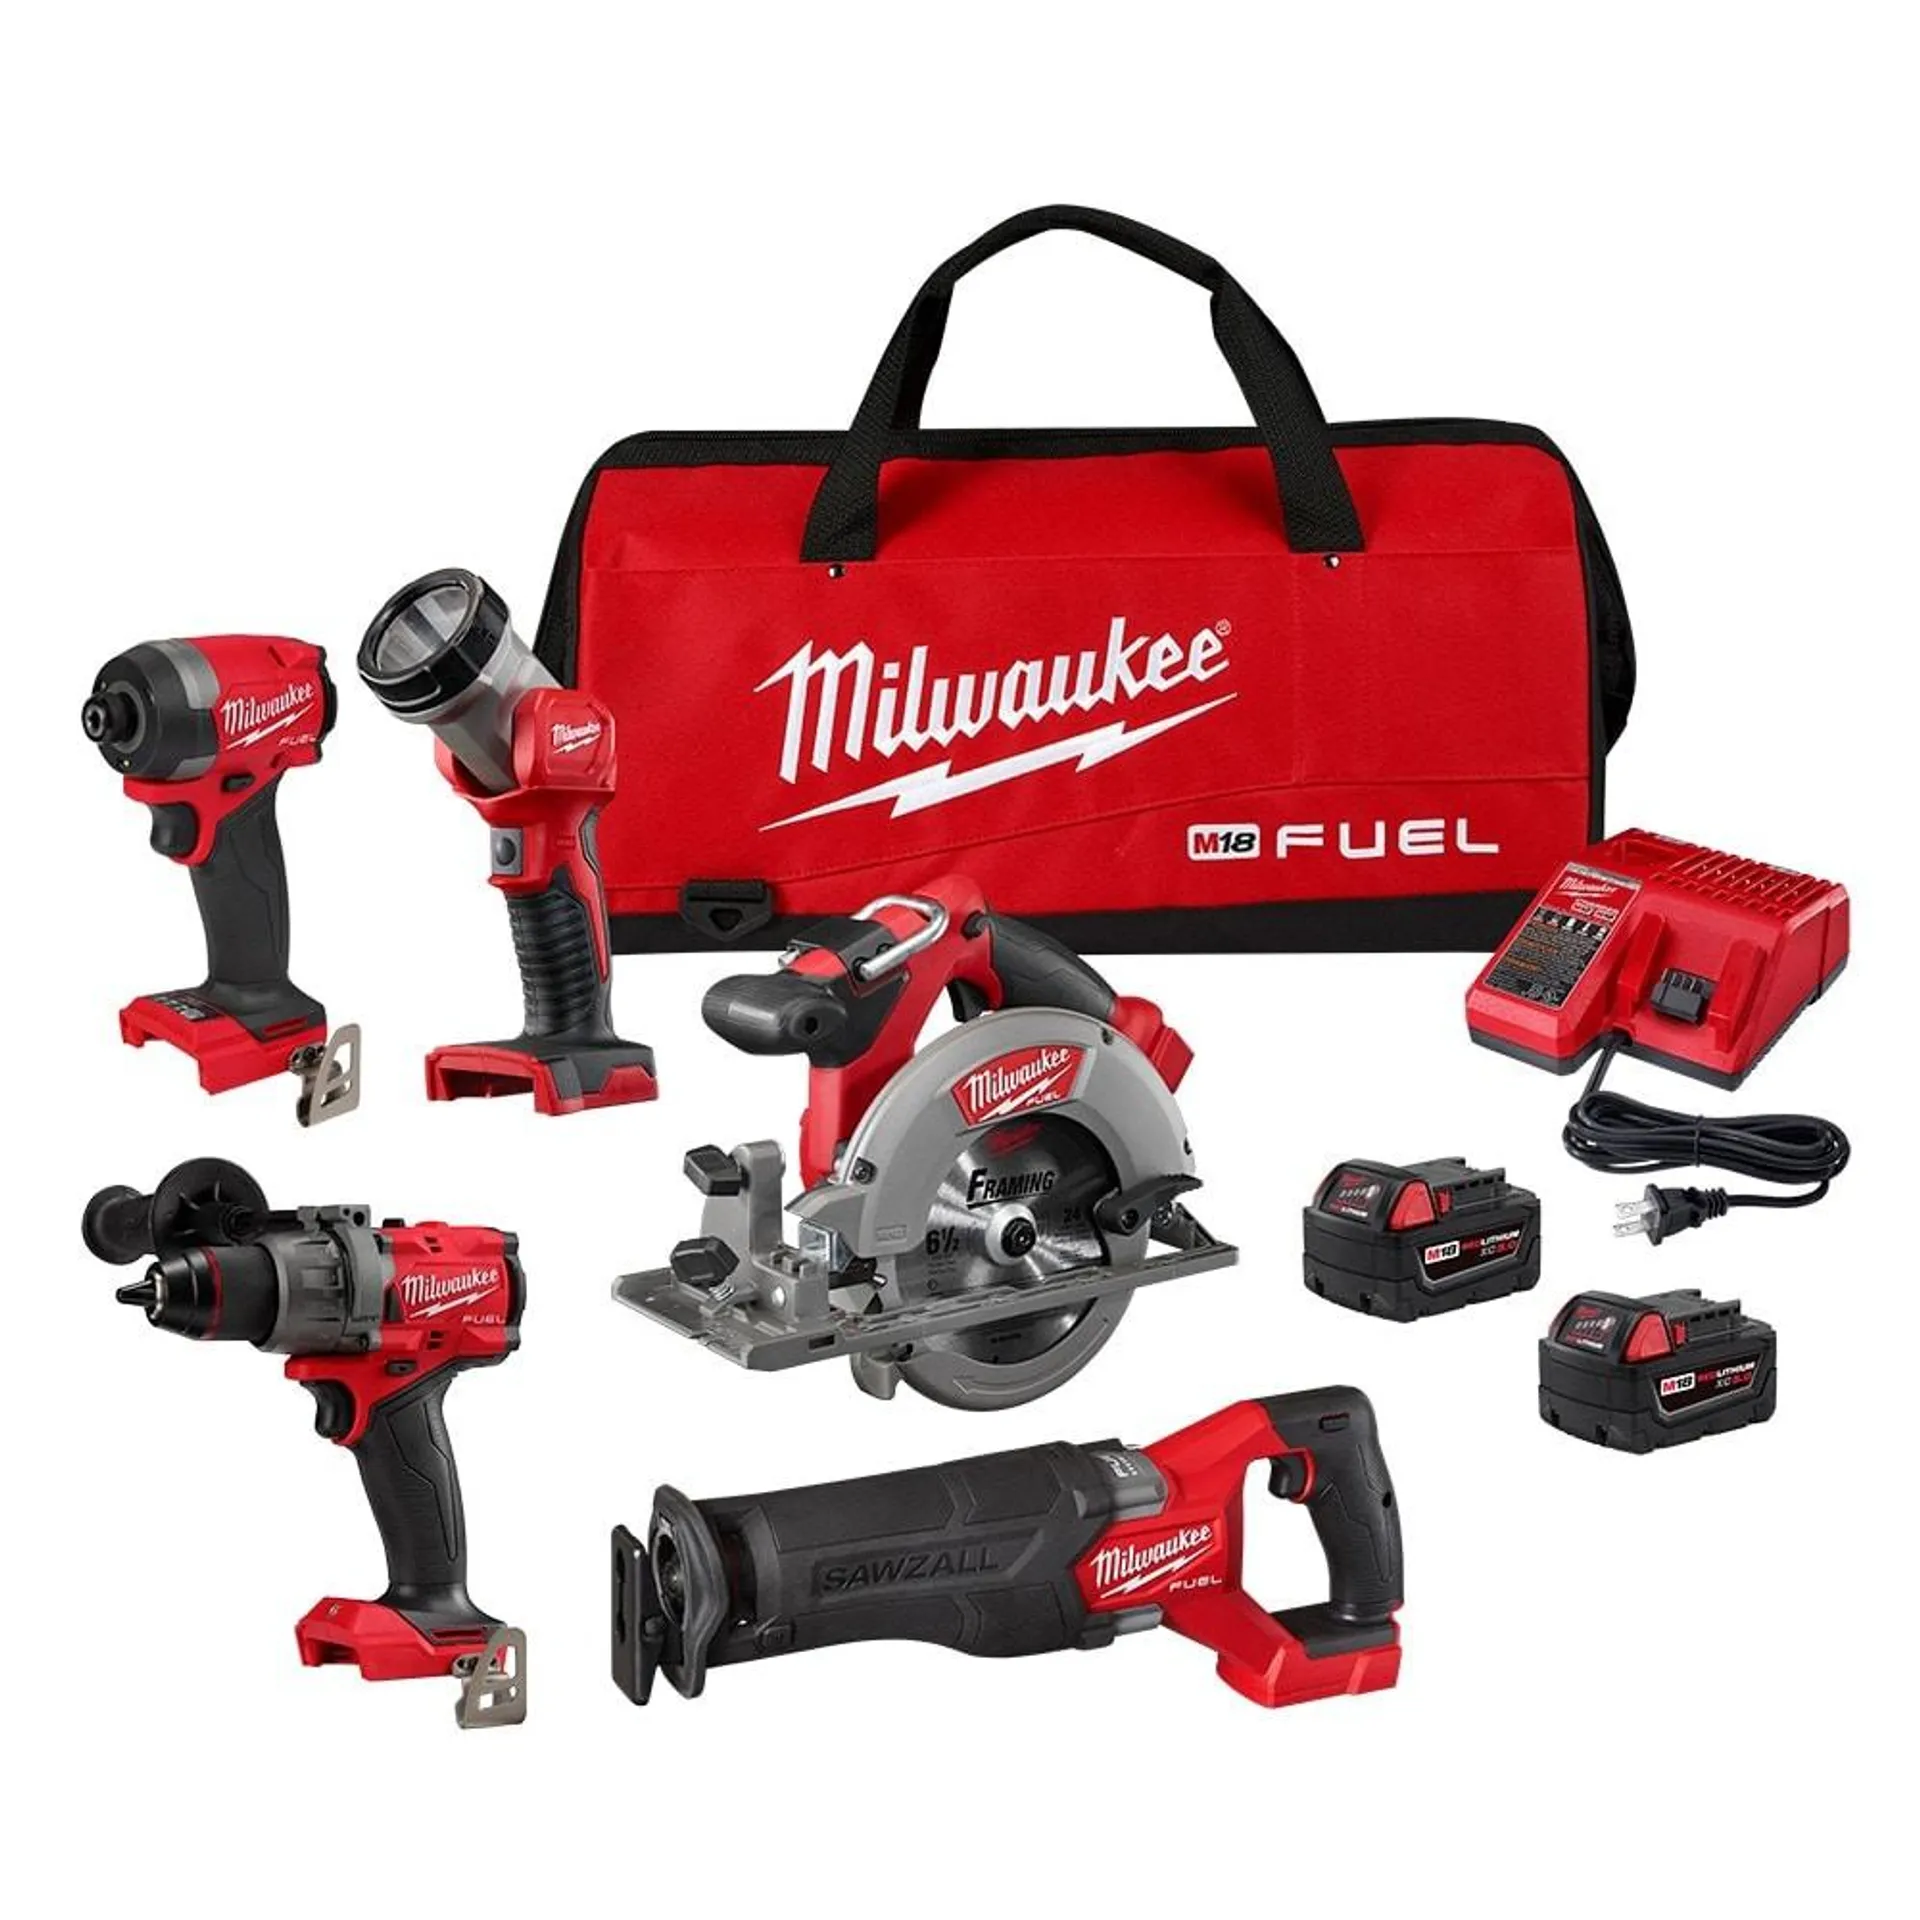 M18 FUEL 18V Lithium-Ion Brushless Cordless Combo Kit (5-Tool) w/ (2) 5.0 Ah Batteries